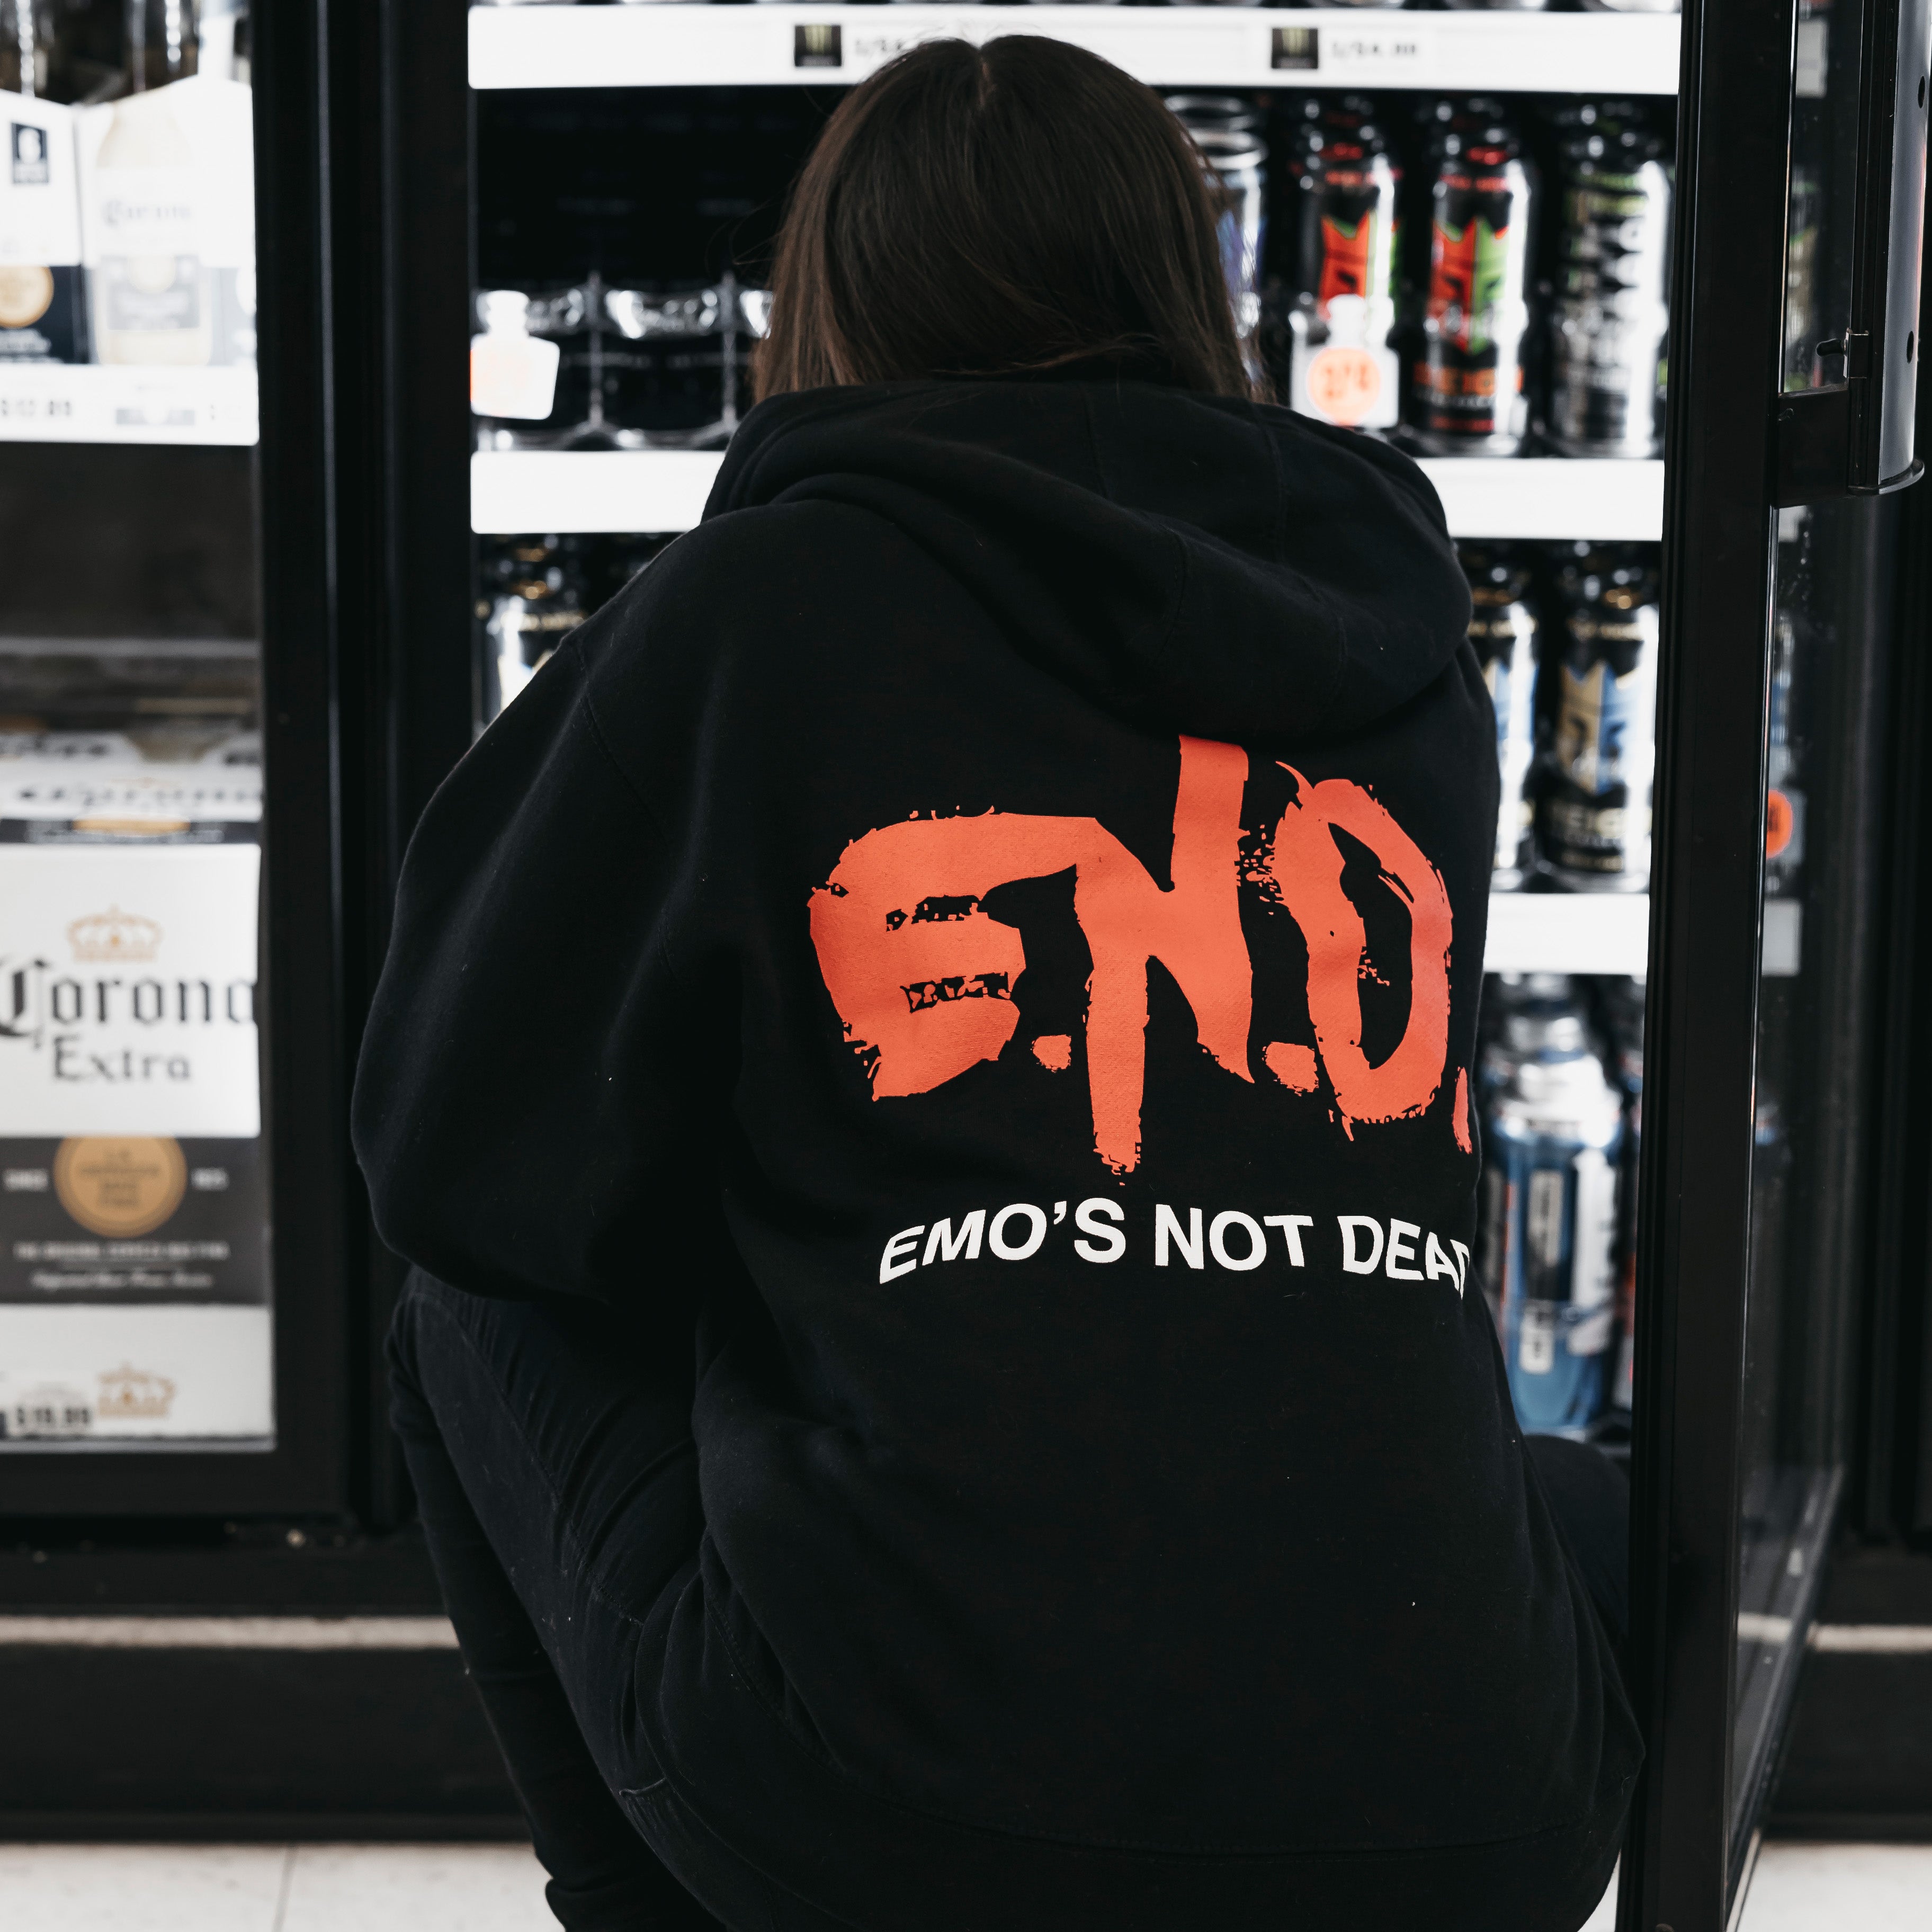 Emo's not dead ジップアップパーカー